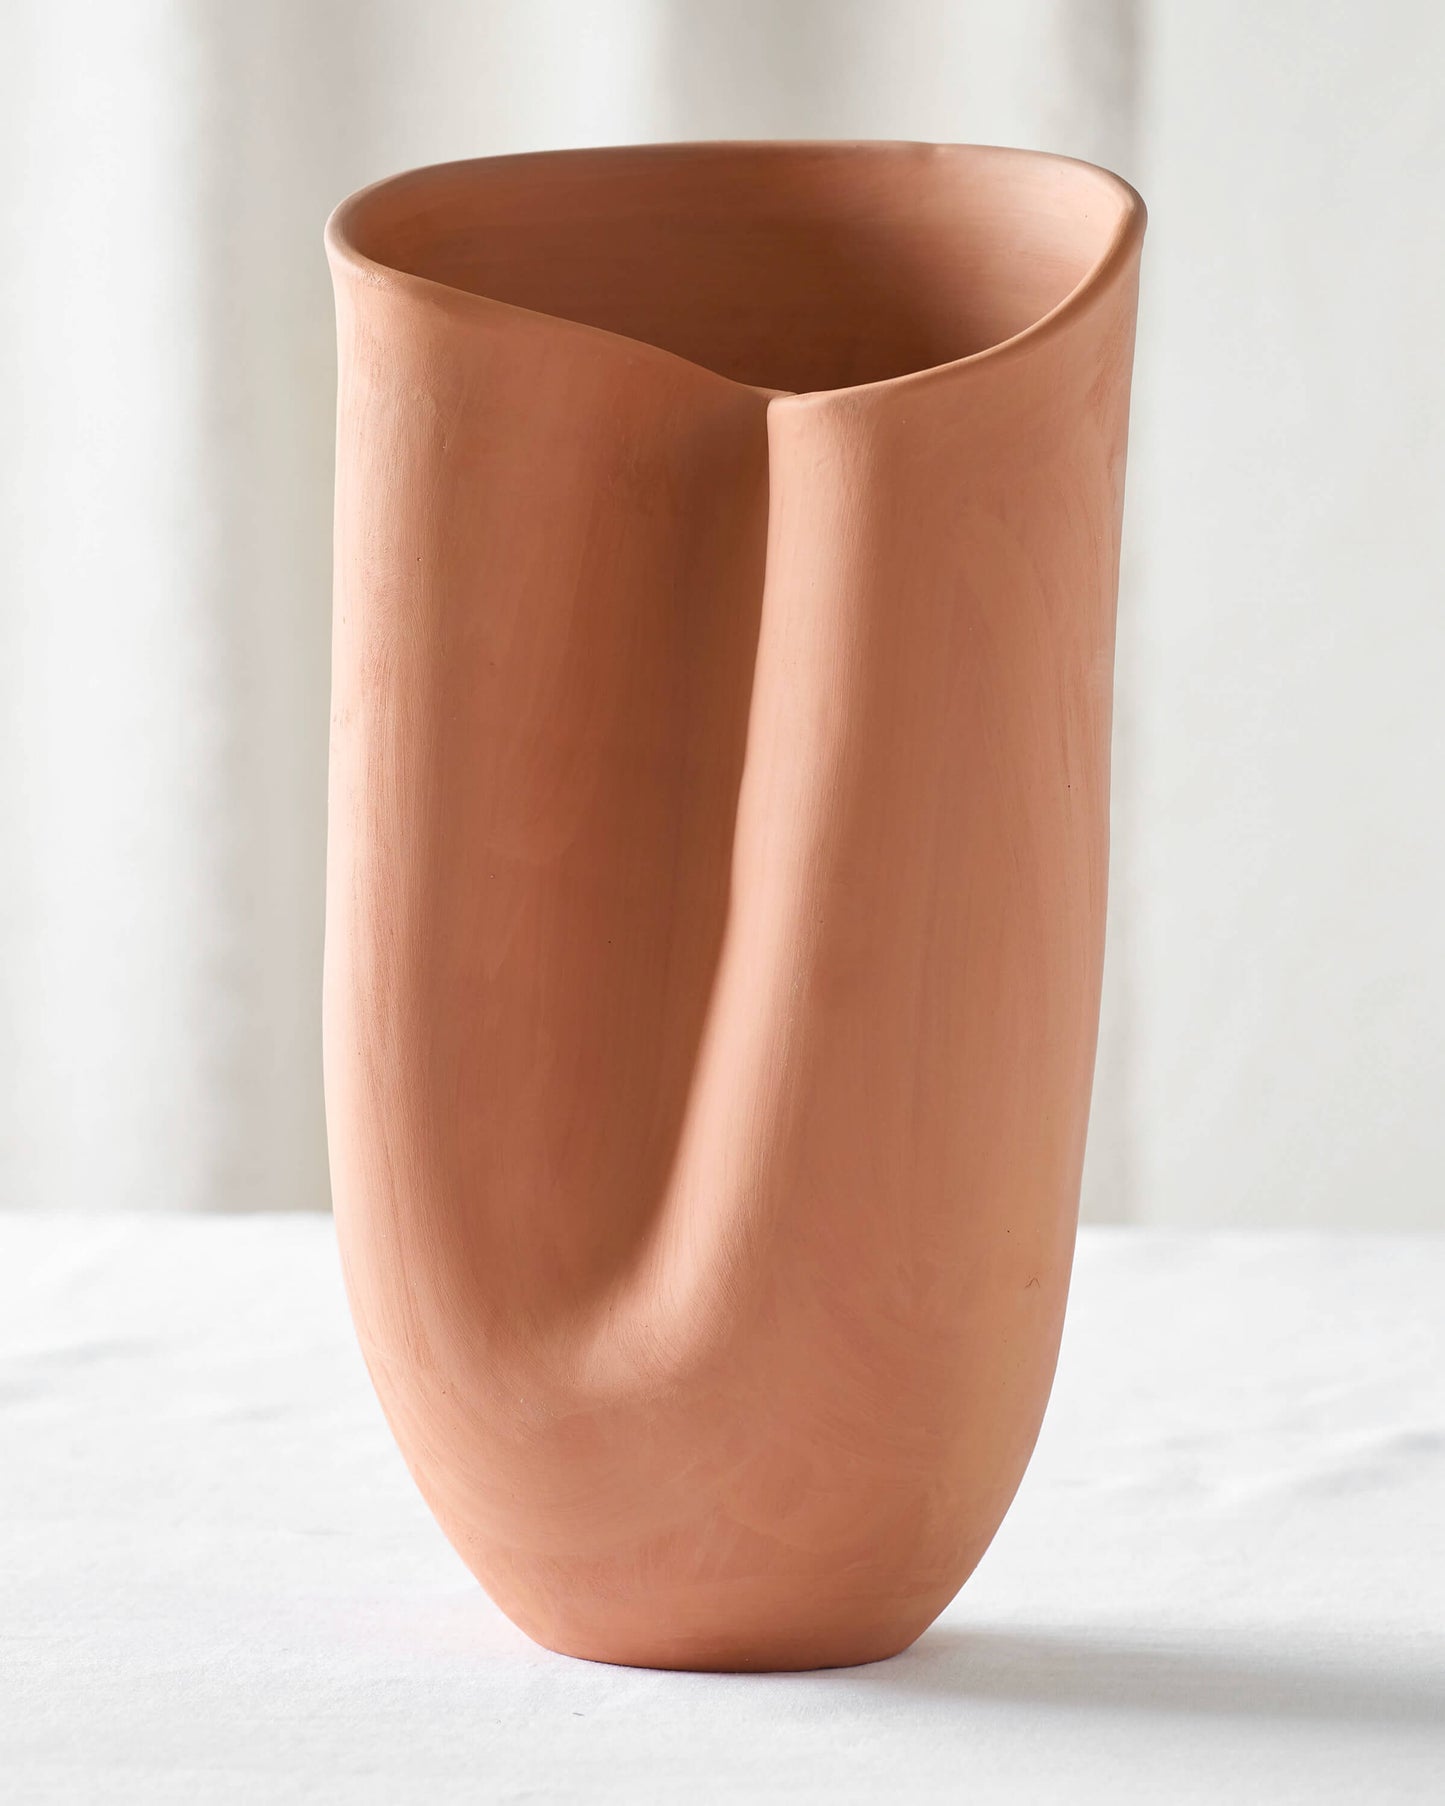 
                  
                    Large sculptural terracotta vase, one of three sizes of the Tahj Terracotta Vases by Fairkind.
                  
                